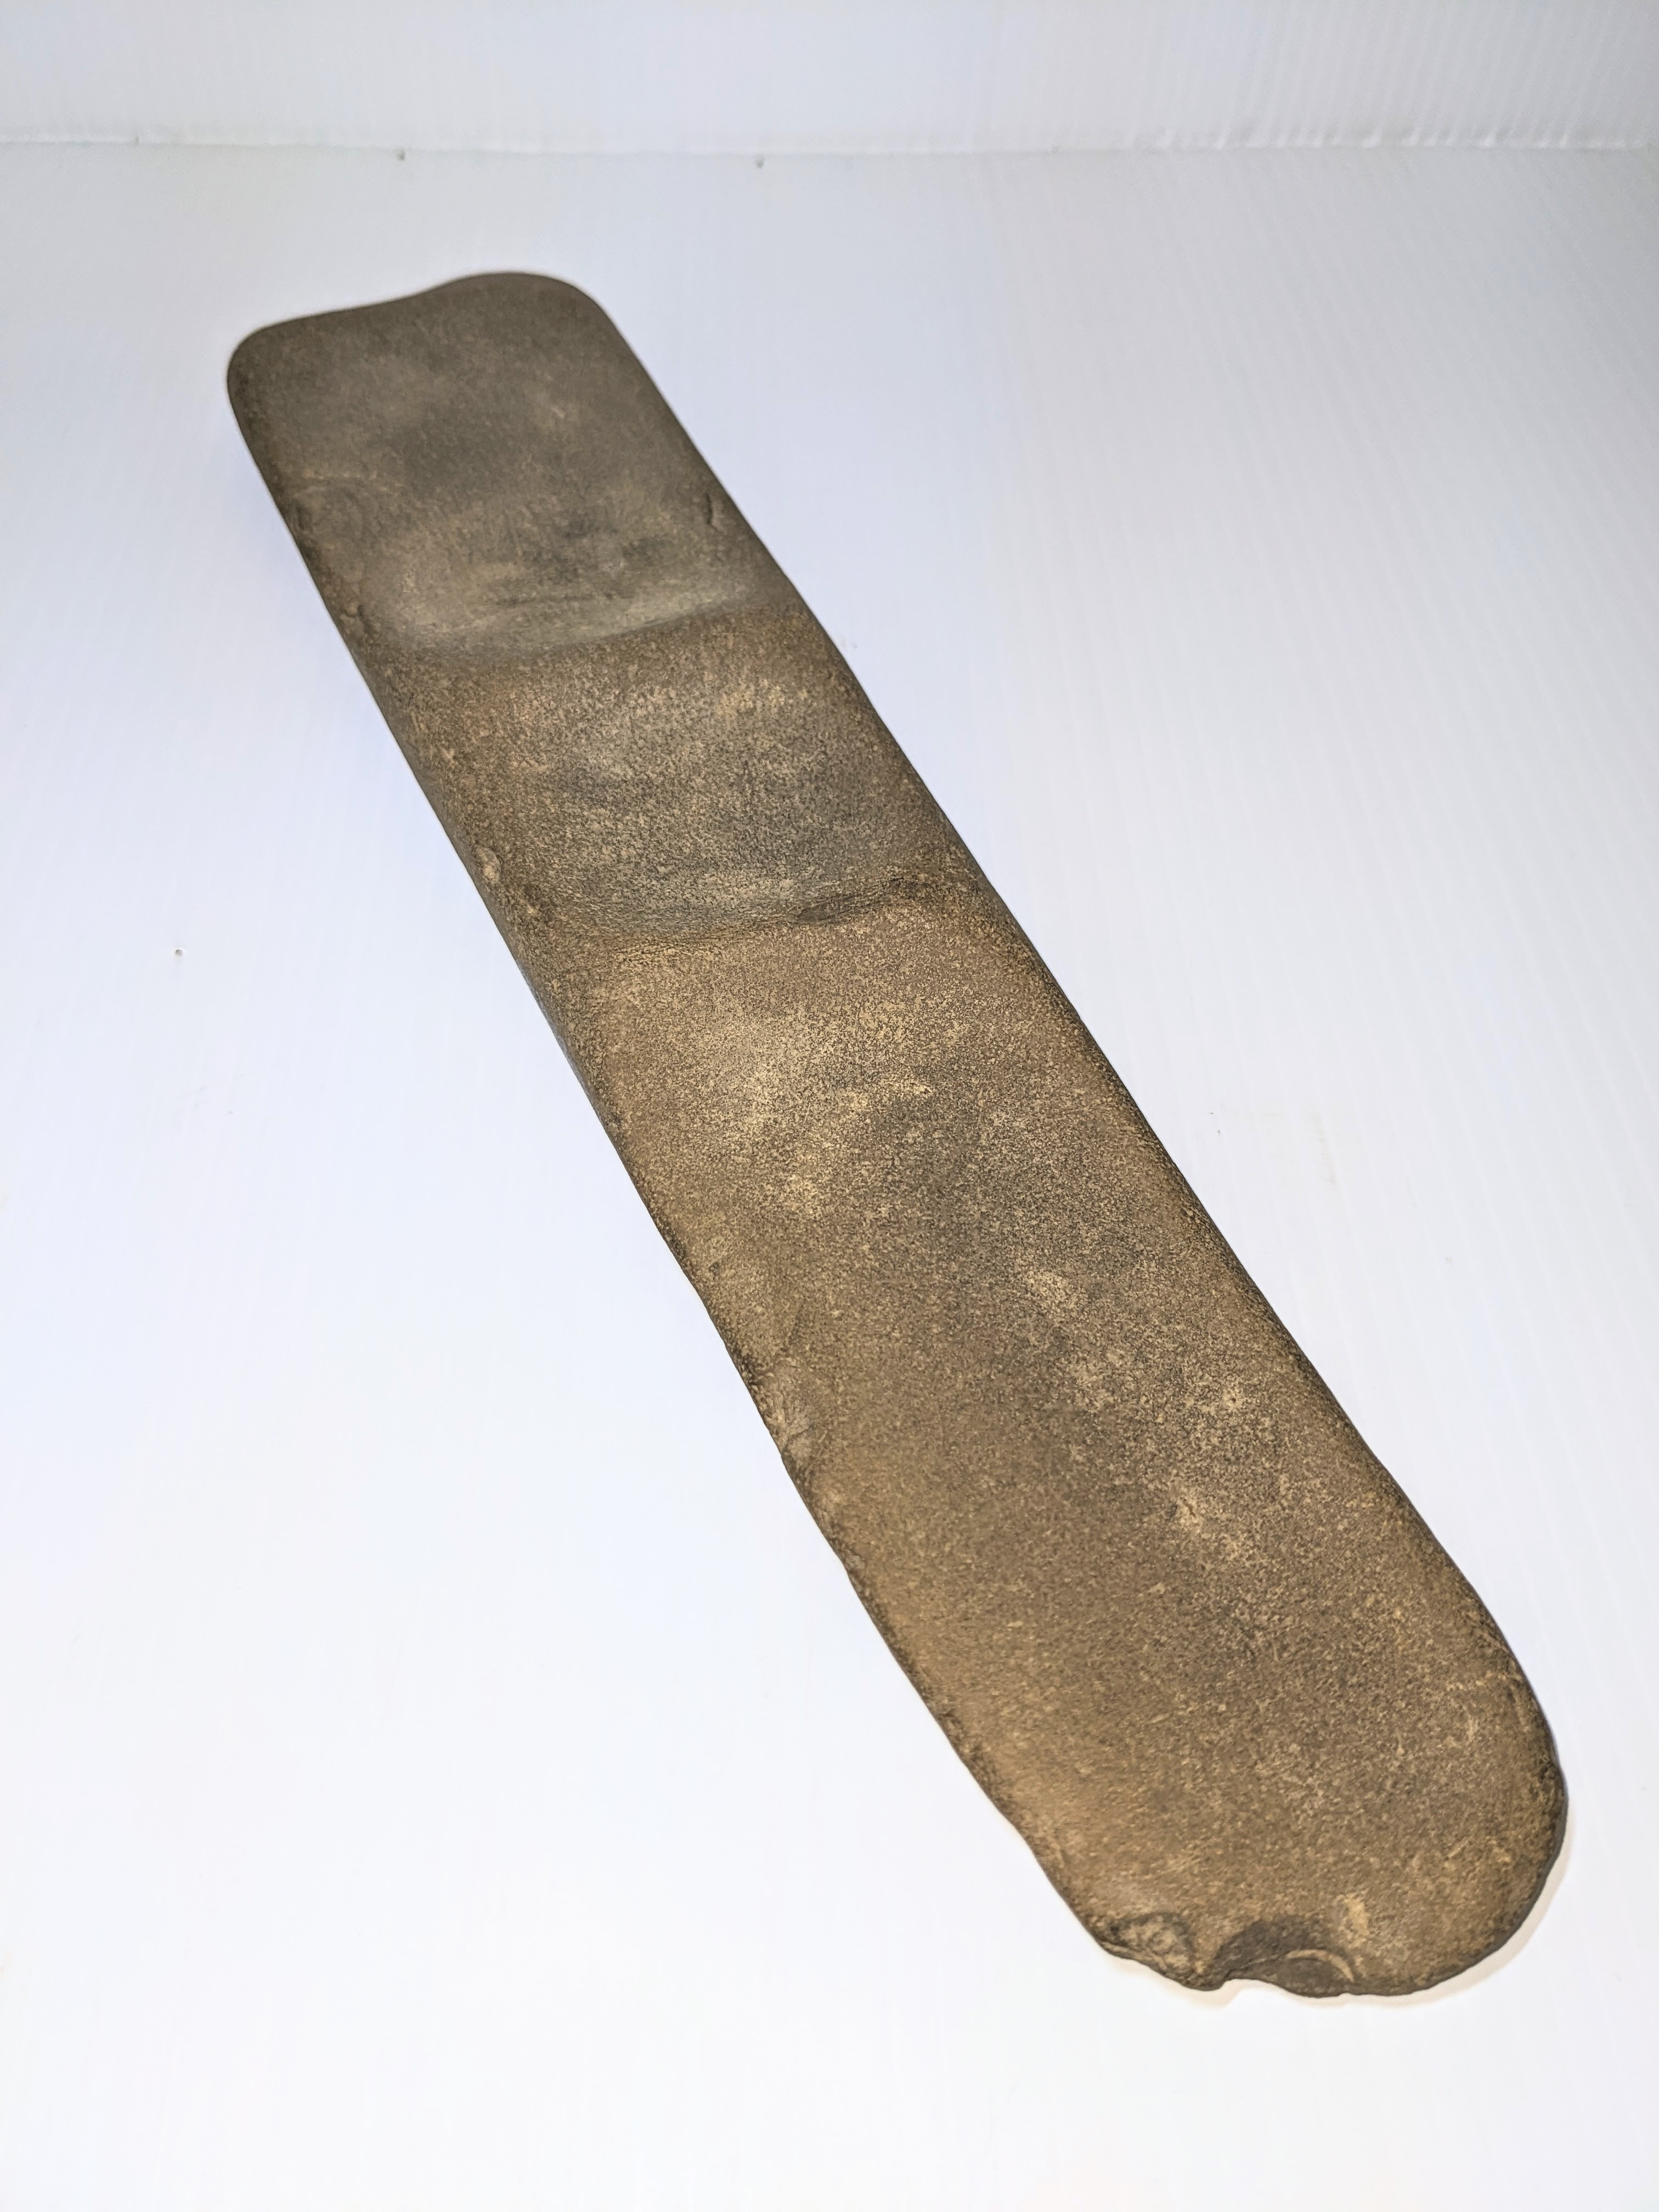 The artifact of the week is this unknown object. It is made of stone, has four depressions (3 visible on this side and one round one on the backside) and has the texture of fine sandpaper. Our best guess is a grindstone of some capacity - but we welcome your thoughts on what it's purpose may be!
PS. It was found in a gravel pit near Fort - which just adds to the mystery!
2003.18.01 / Lambert, Don
26/09/2022